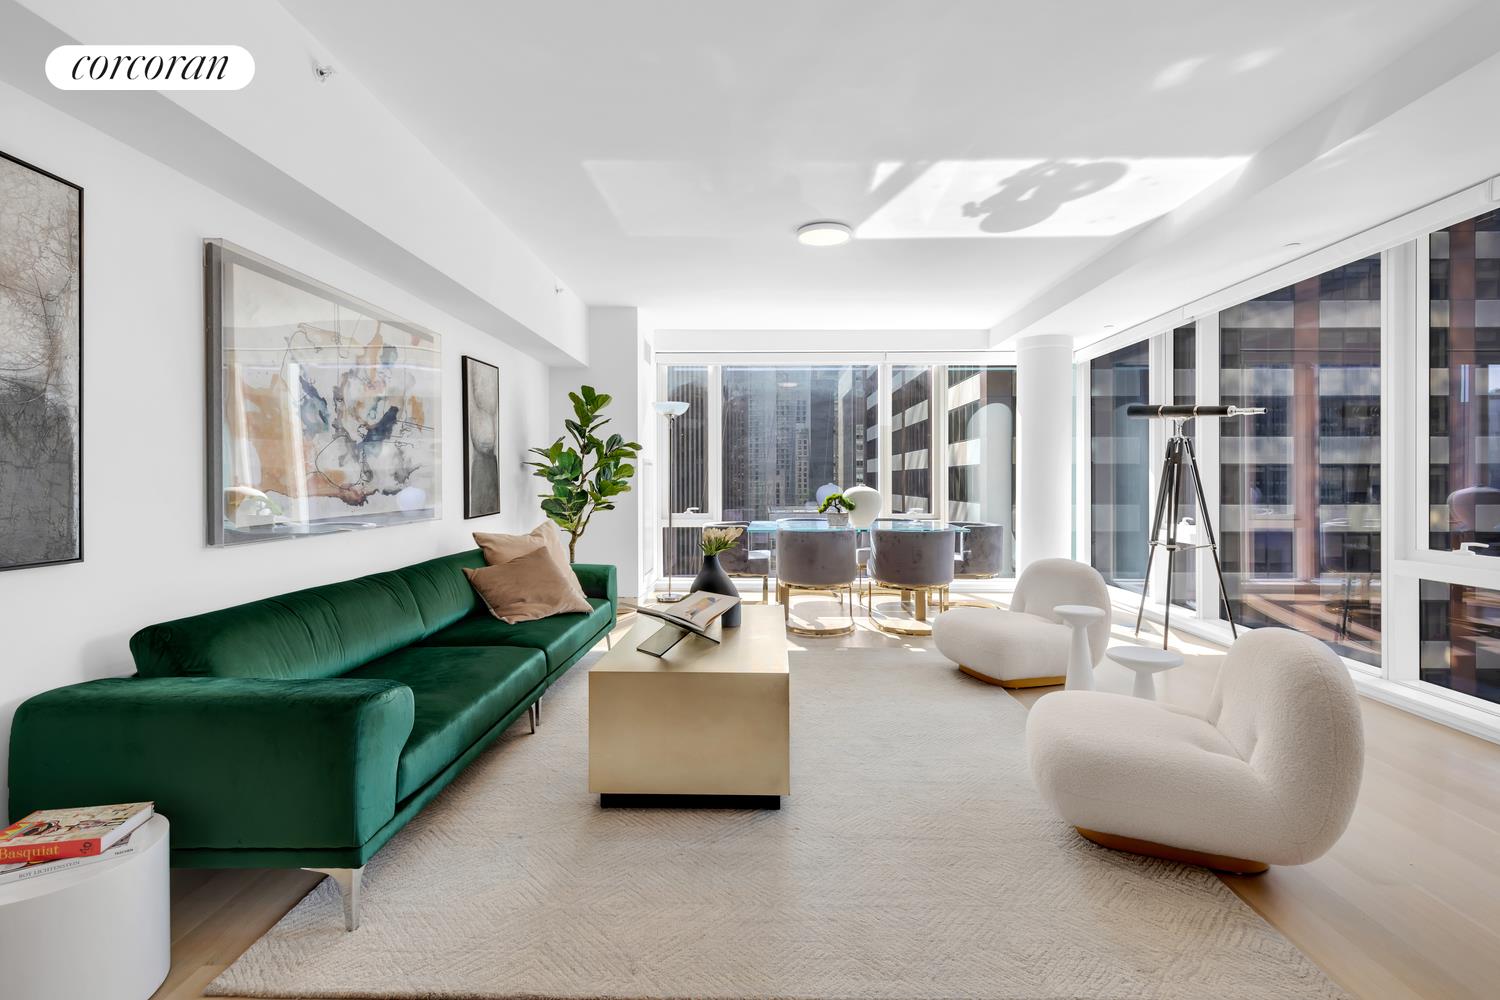 135 West 52nd Street 27A, Chelsea And Clinton, Downtown, NYC - 4 Bedrooms  
3.5 Bathrooms  
7 Rooms - 